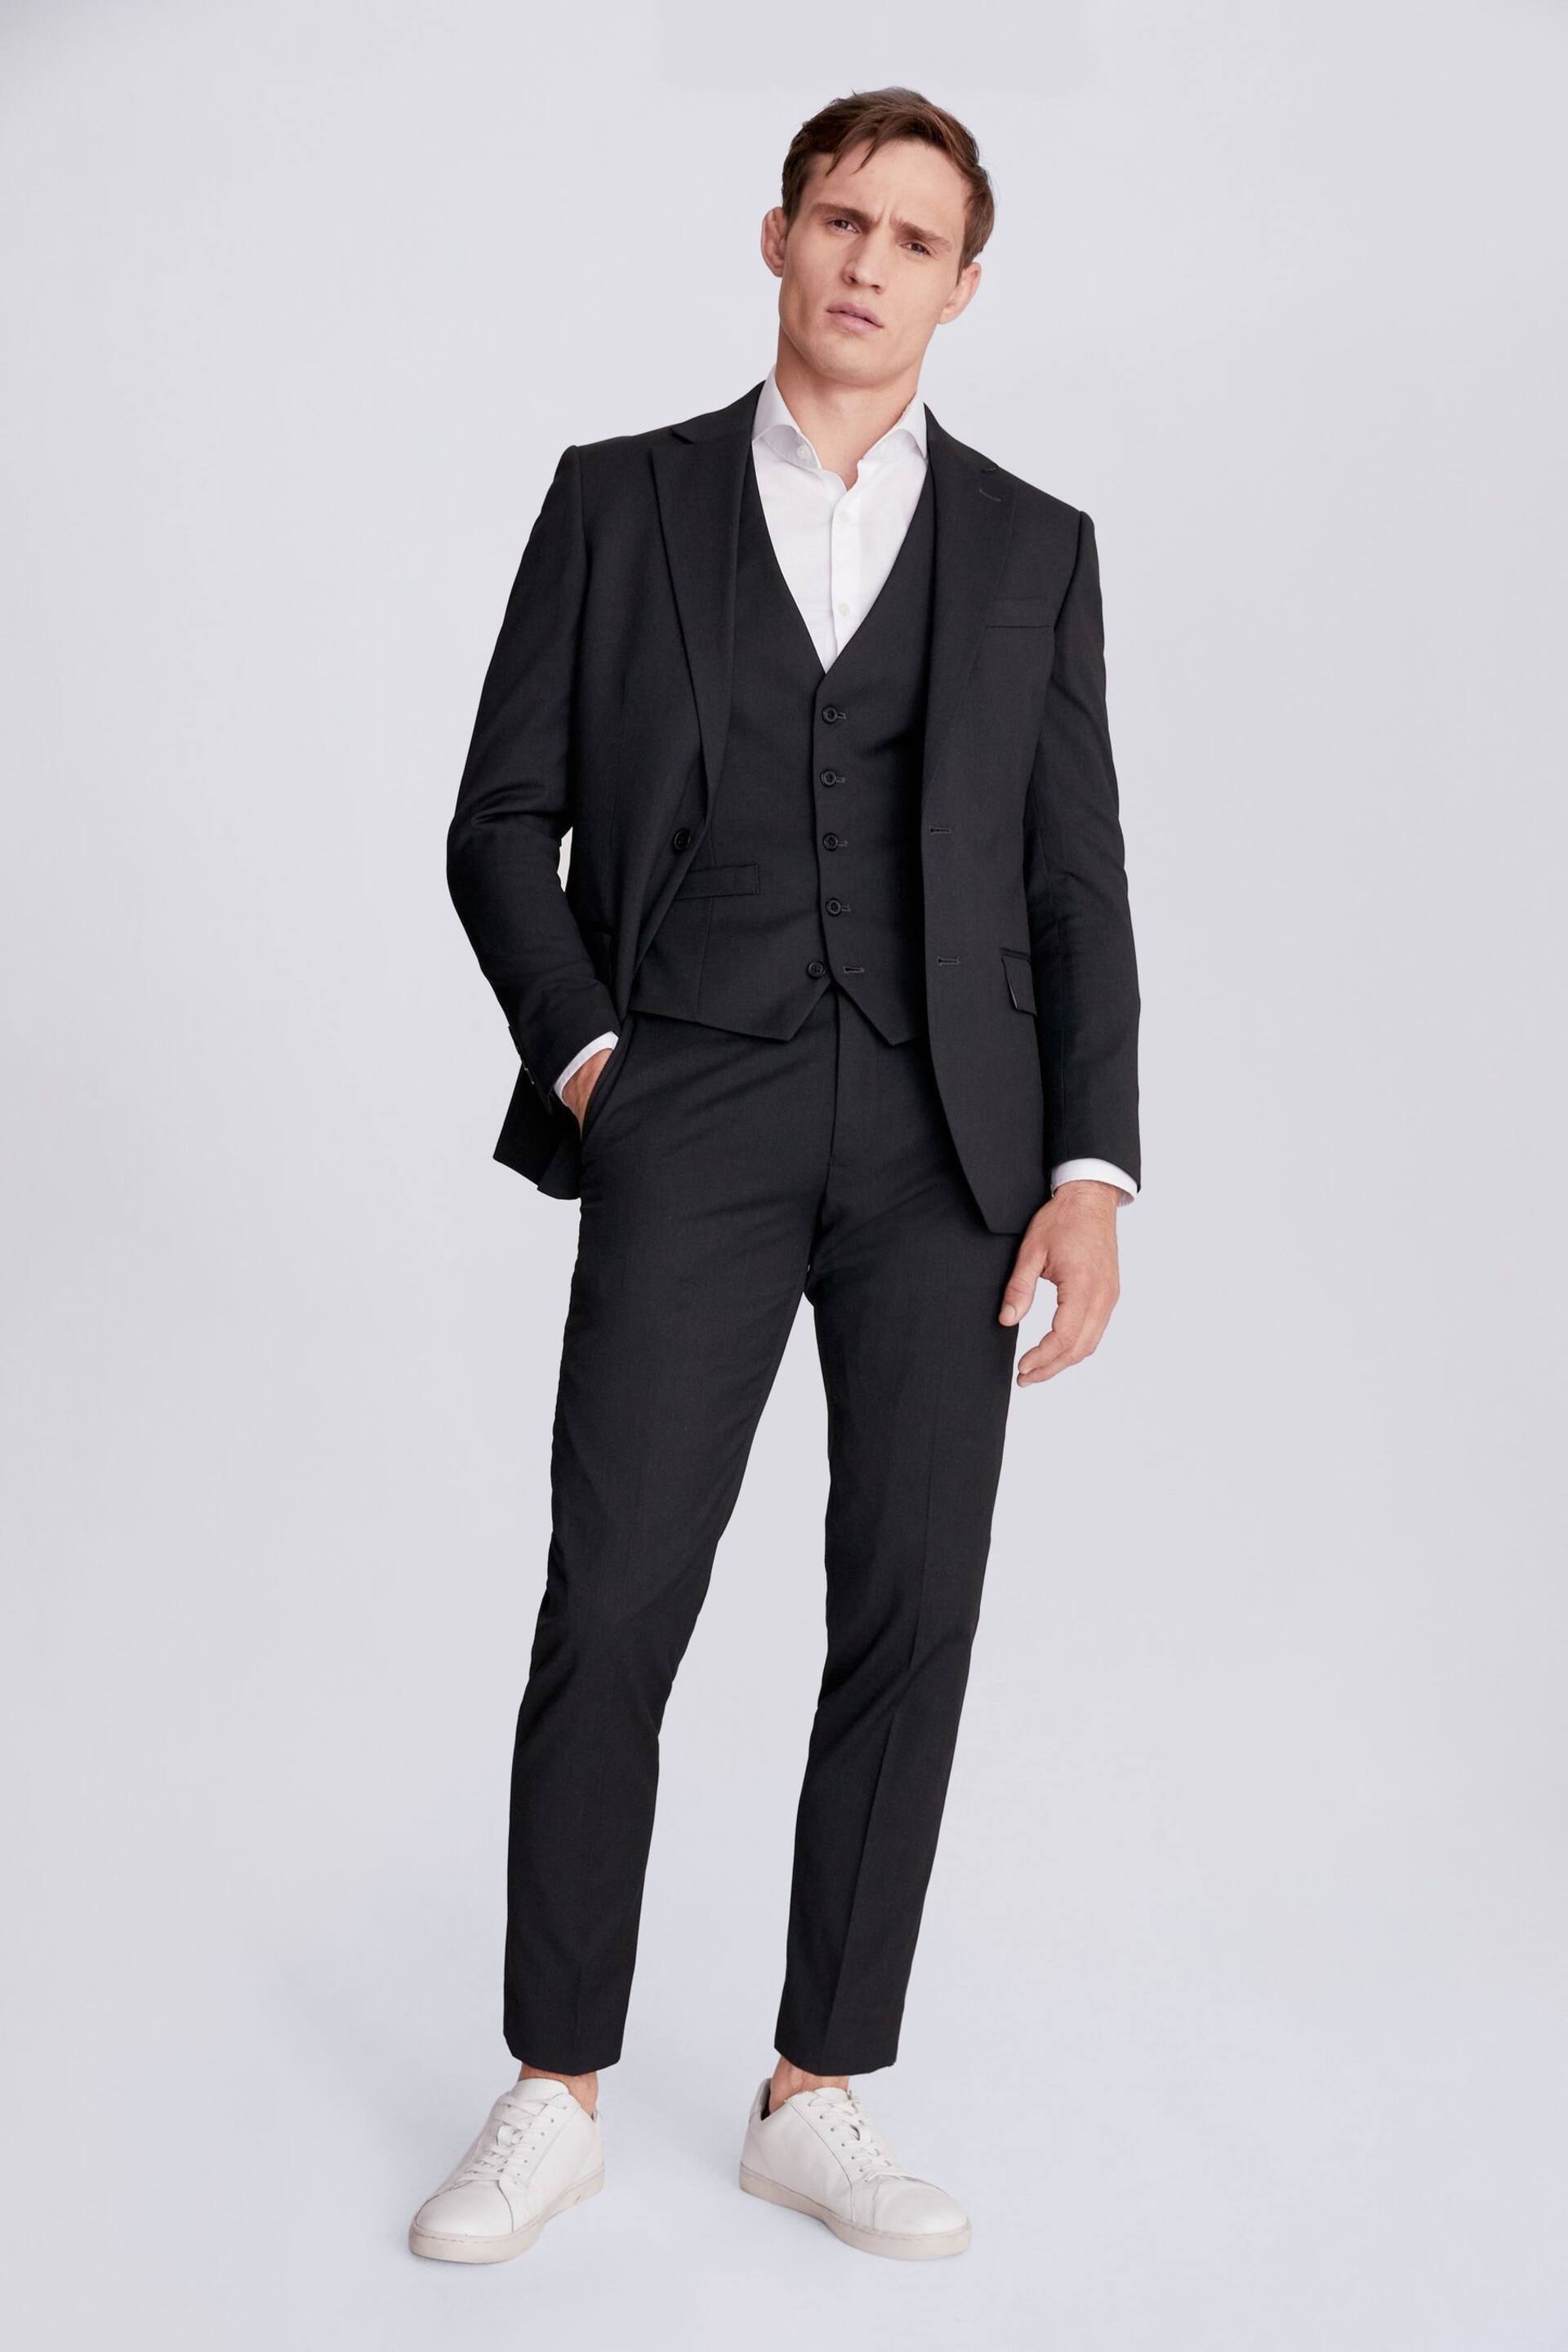 MOSS Charcoal Grey Tailored Stretch Suit: Jacket - Image 4 of 8